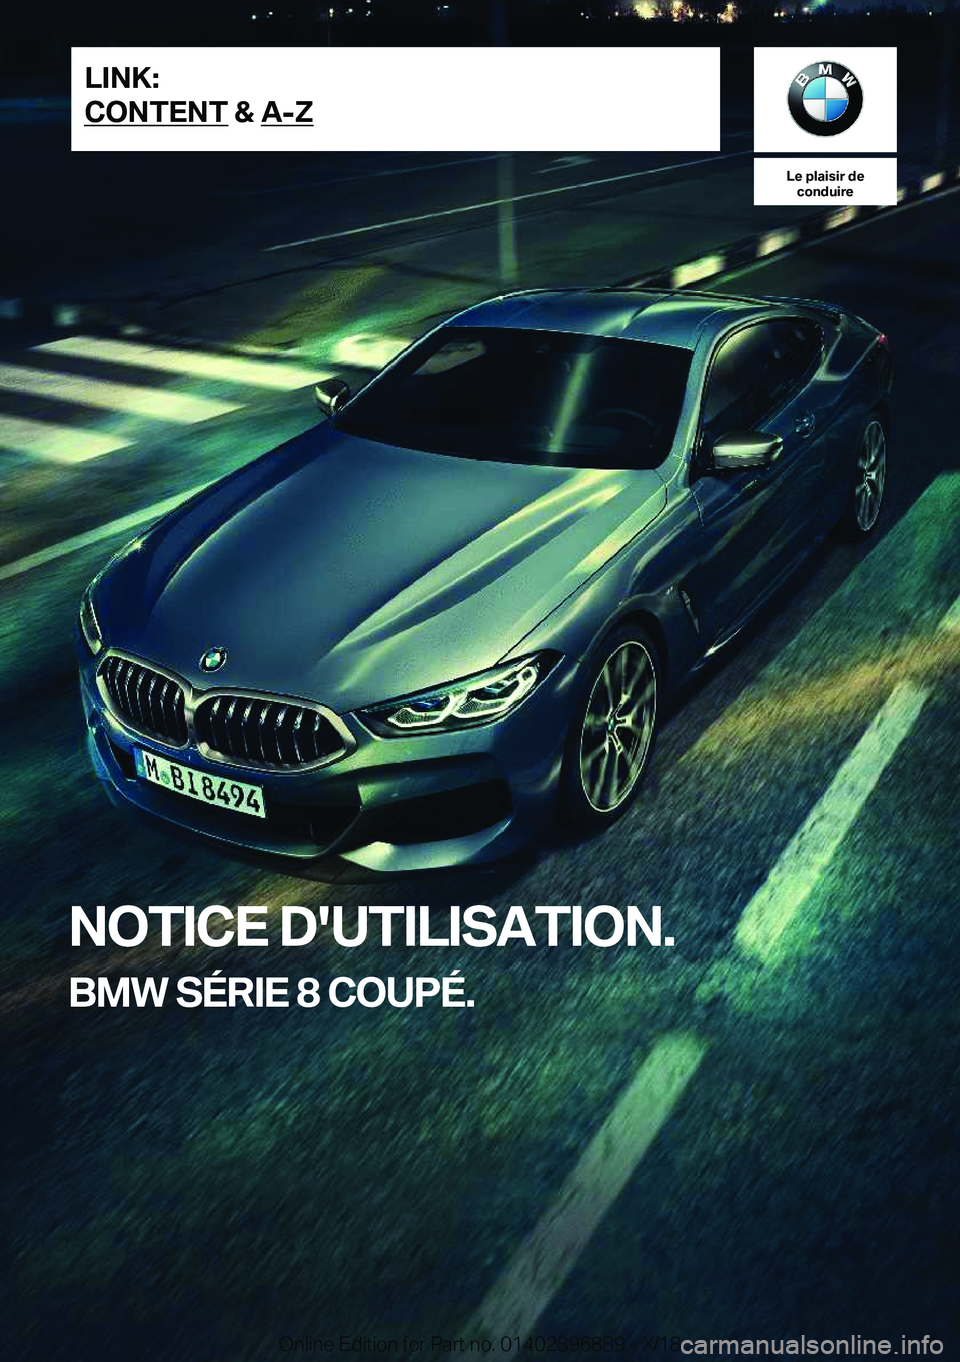 BMW 8 SERIES COUPE 2019  Notices Demploi (in French) �L�e��p�l�a�i�s�i�r��d�e�c�o�n�d�u�i�r�e
�N�O�T�I�C�E��D�'�U�T�I�L�I�S�A�T�I�O�N�.
�B�M�W��S�